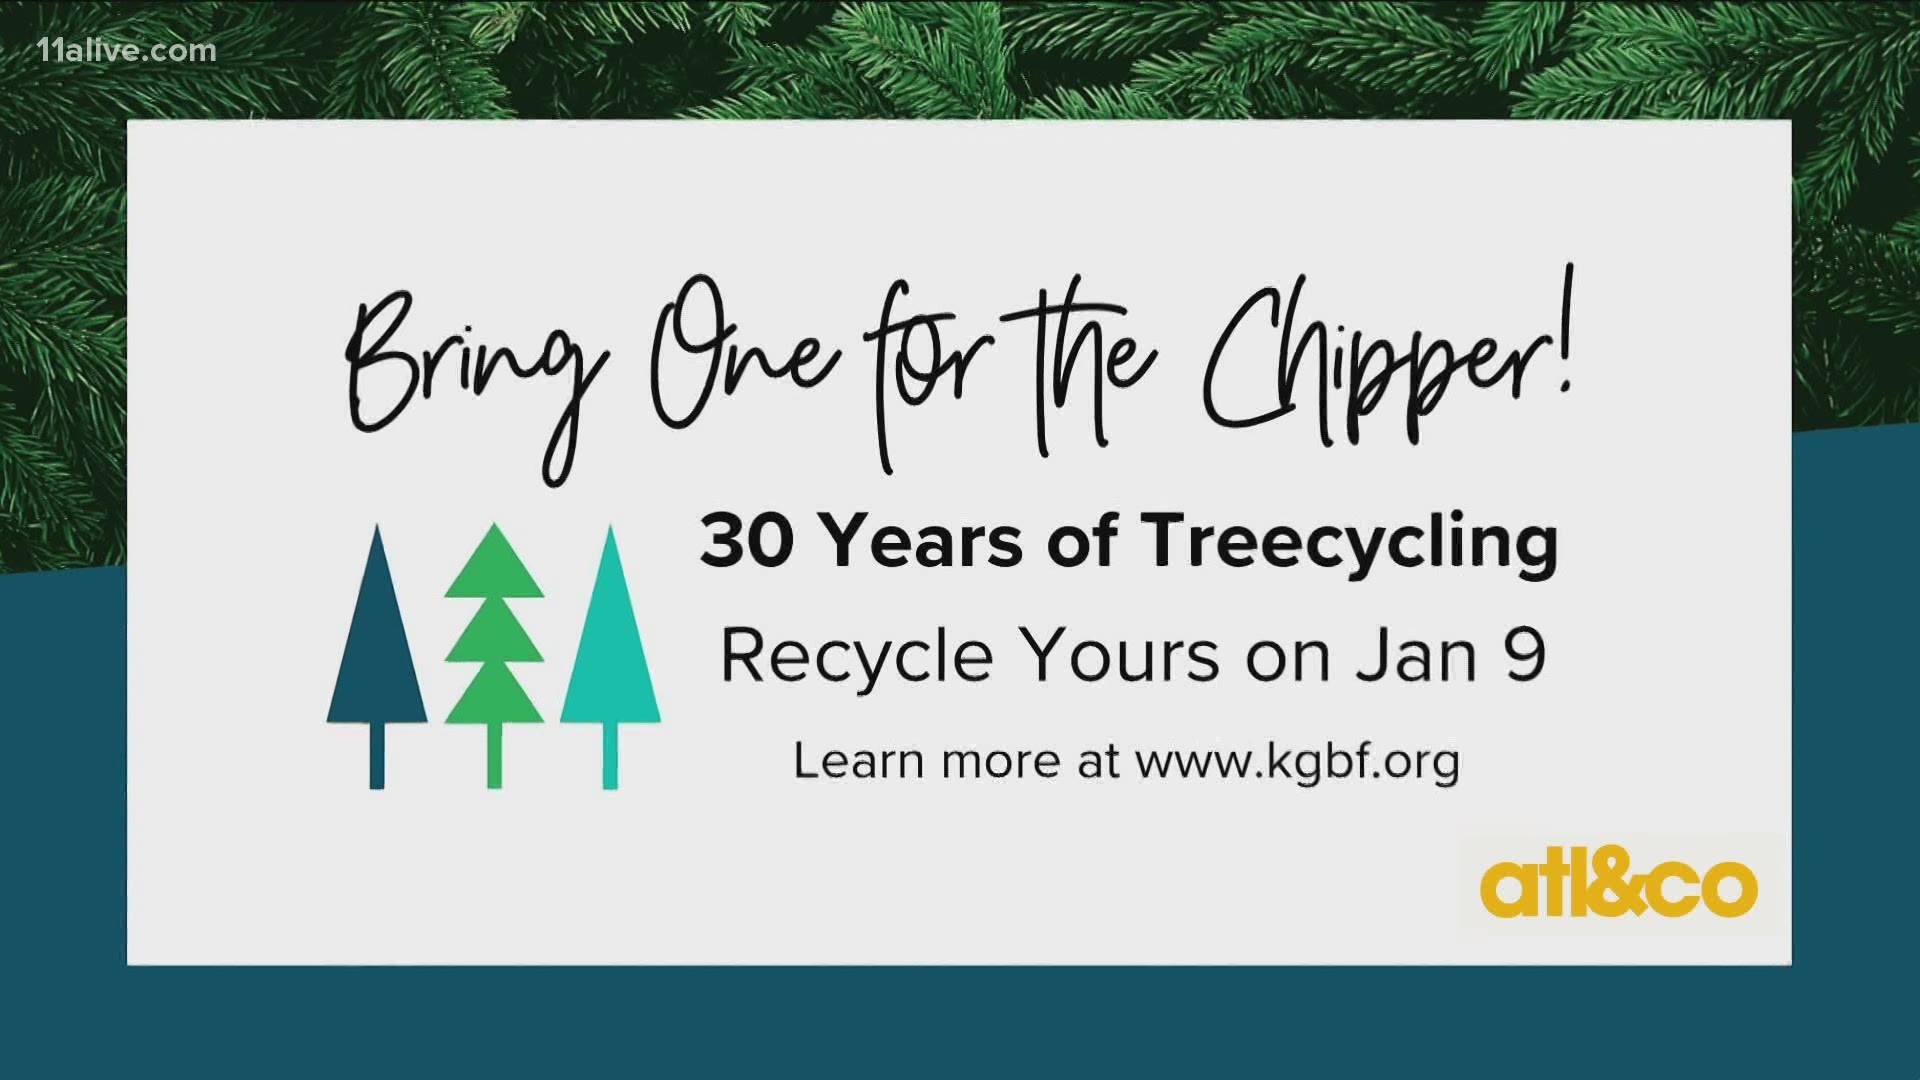 Bring One for the Chipper! Recyle your Christmas tree on January 9.